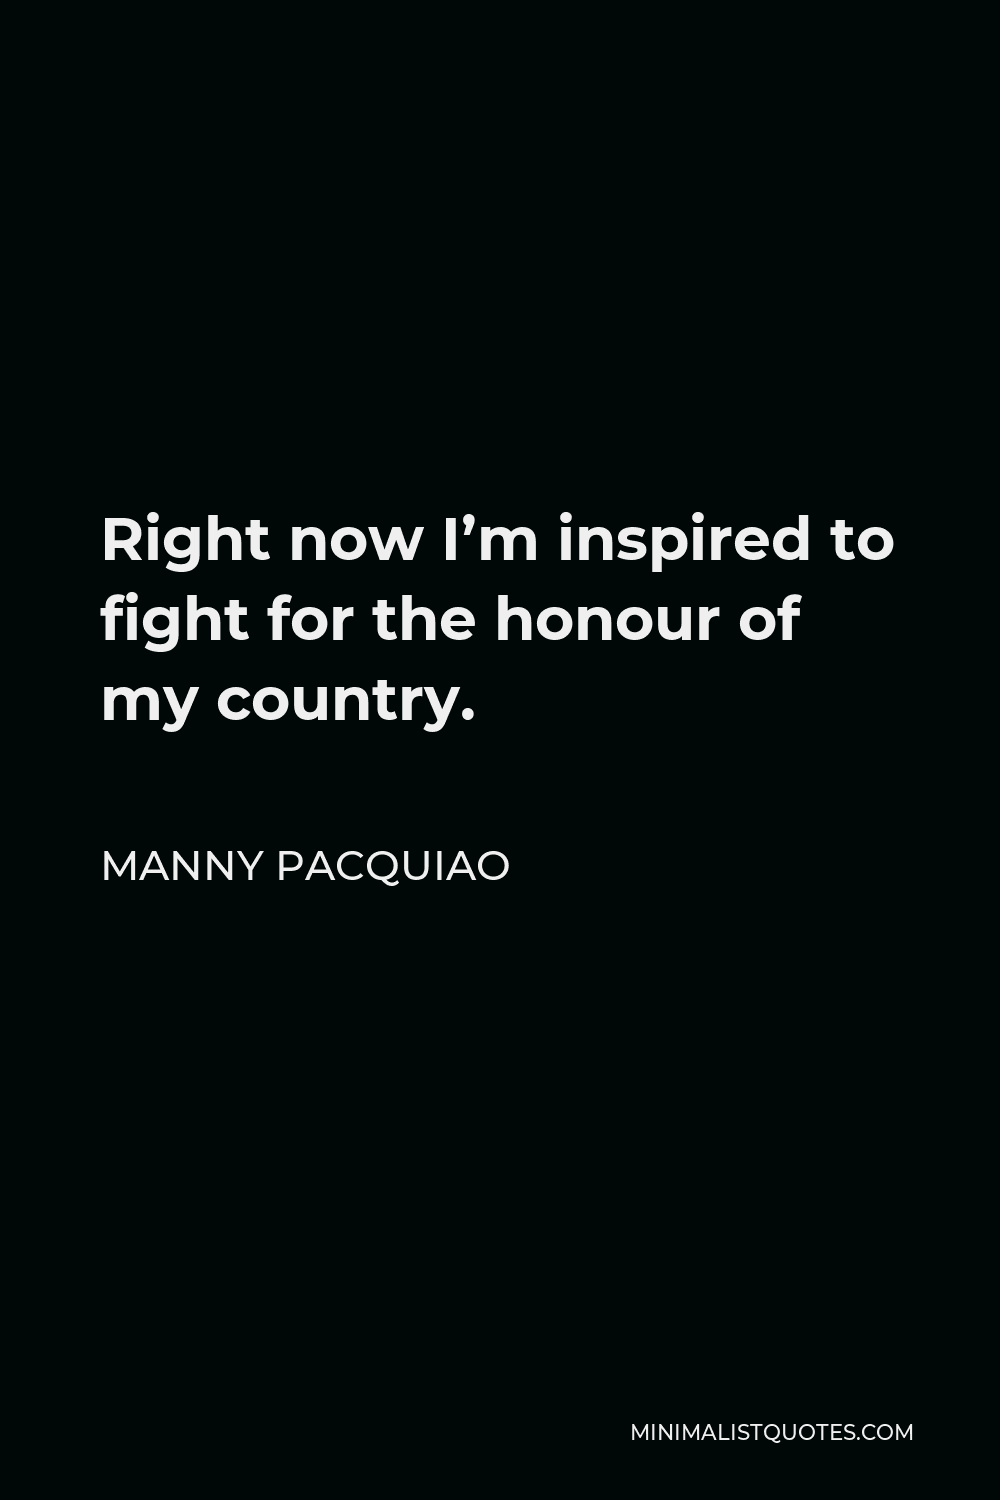 Manny Pacquiao Quote - Right now I’m inspired to fight for the honour of my country.